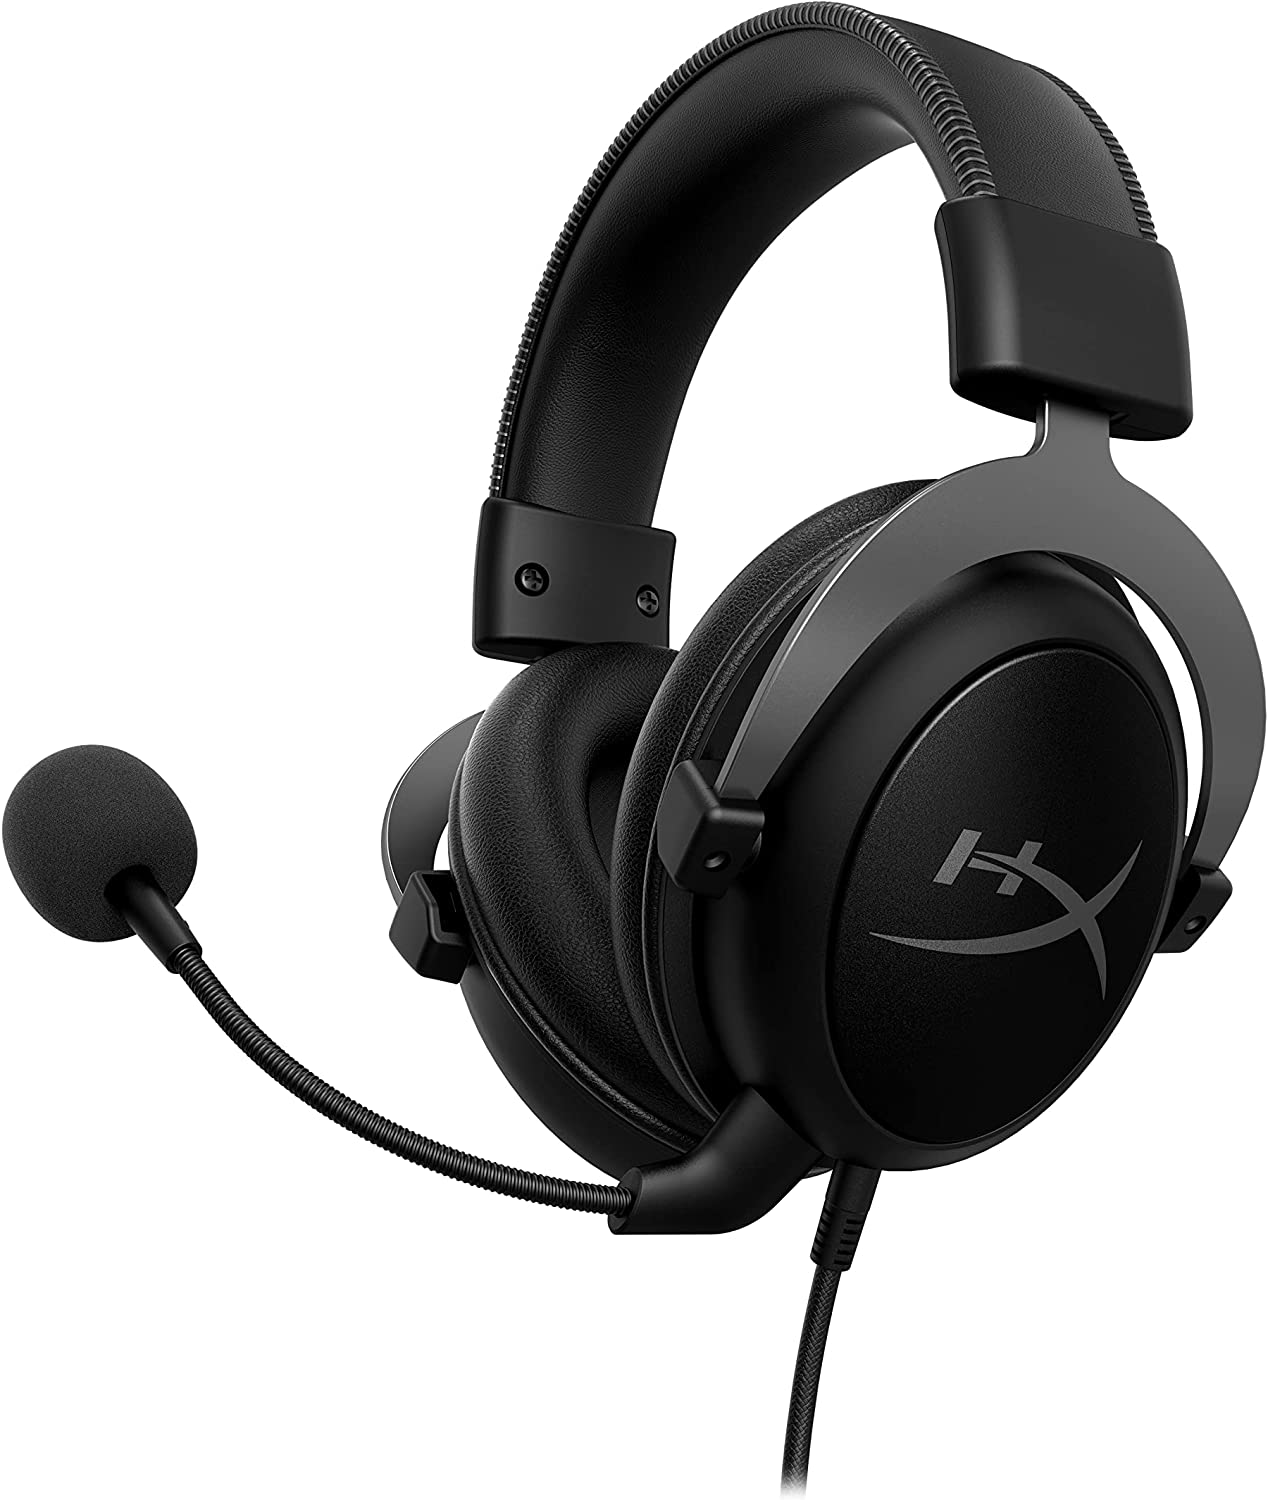 10 Best Gaming Headsets For All Gamers